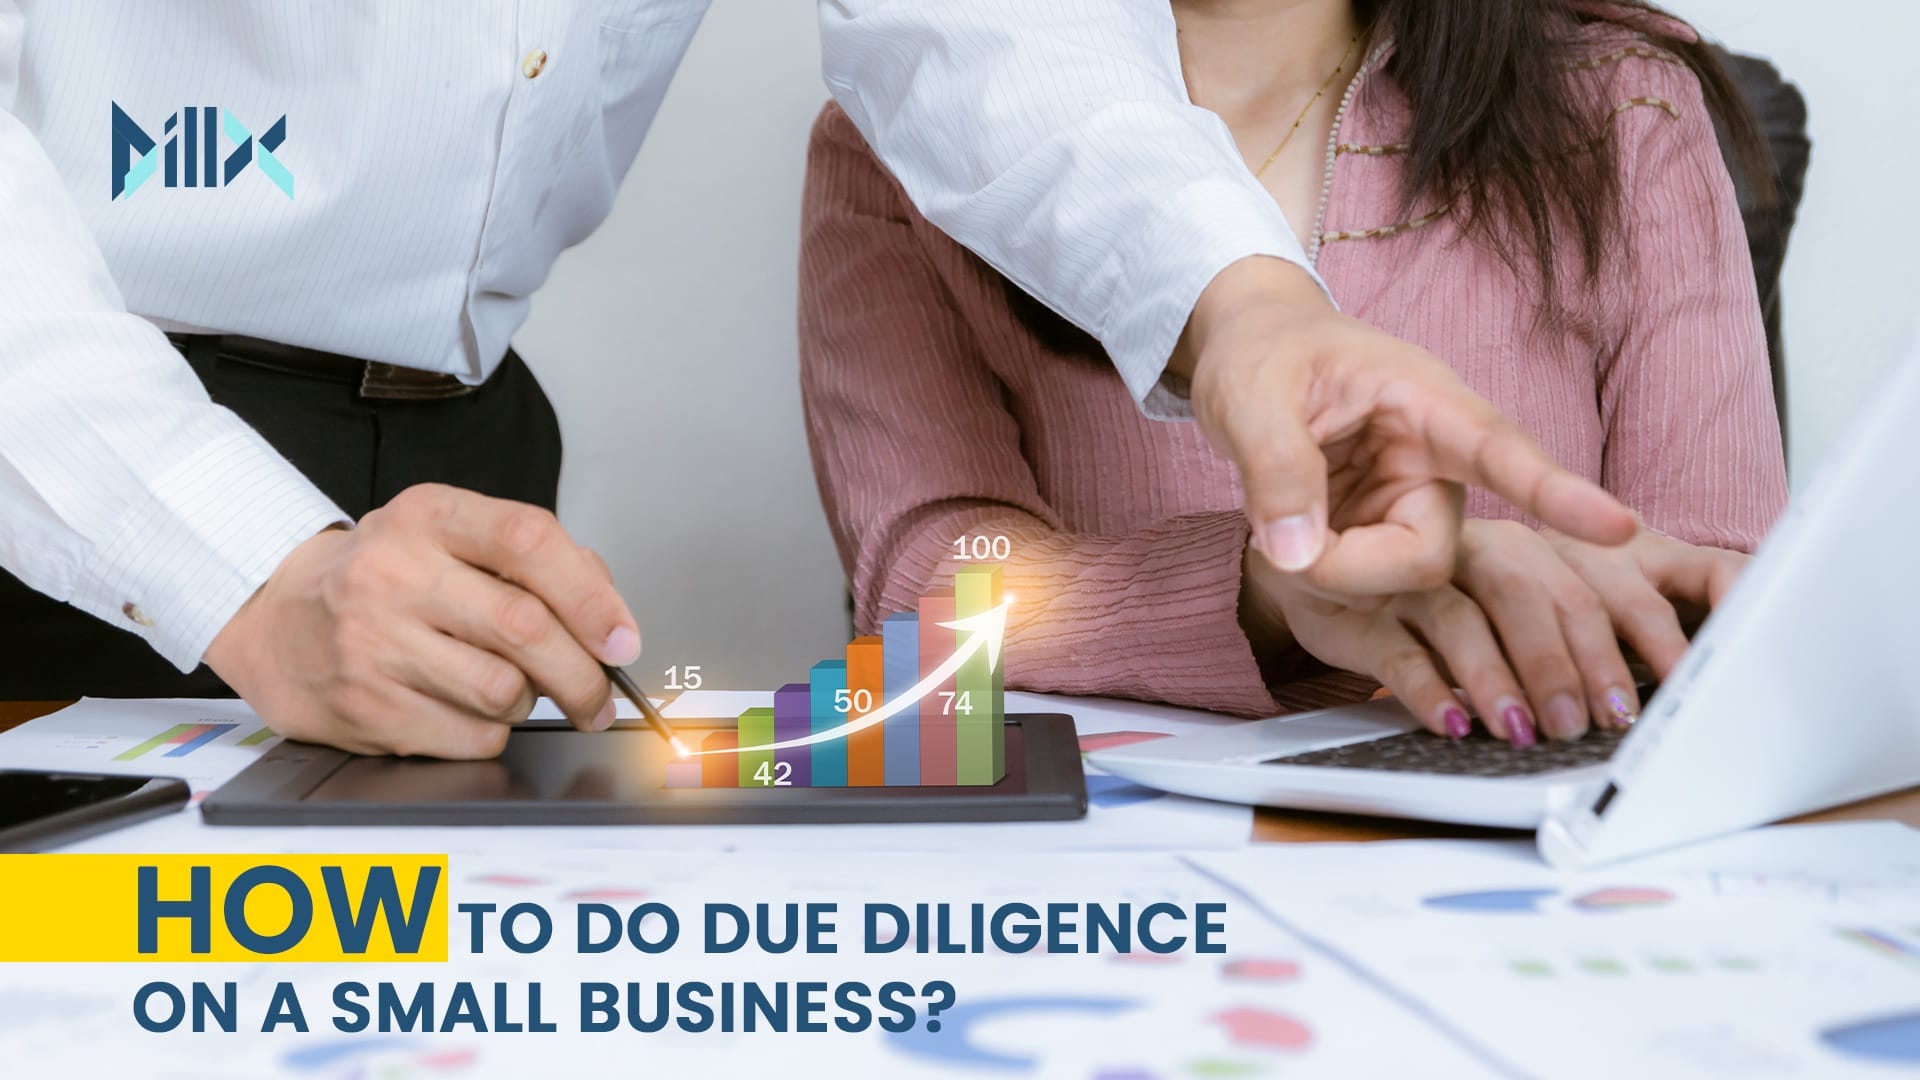 How to do Due Diligence on a Small Business